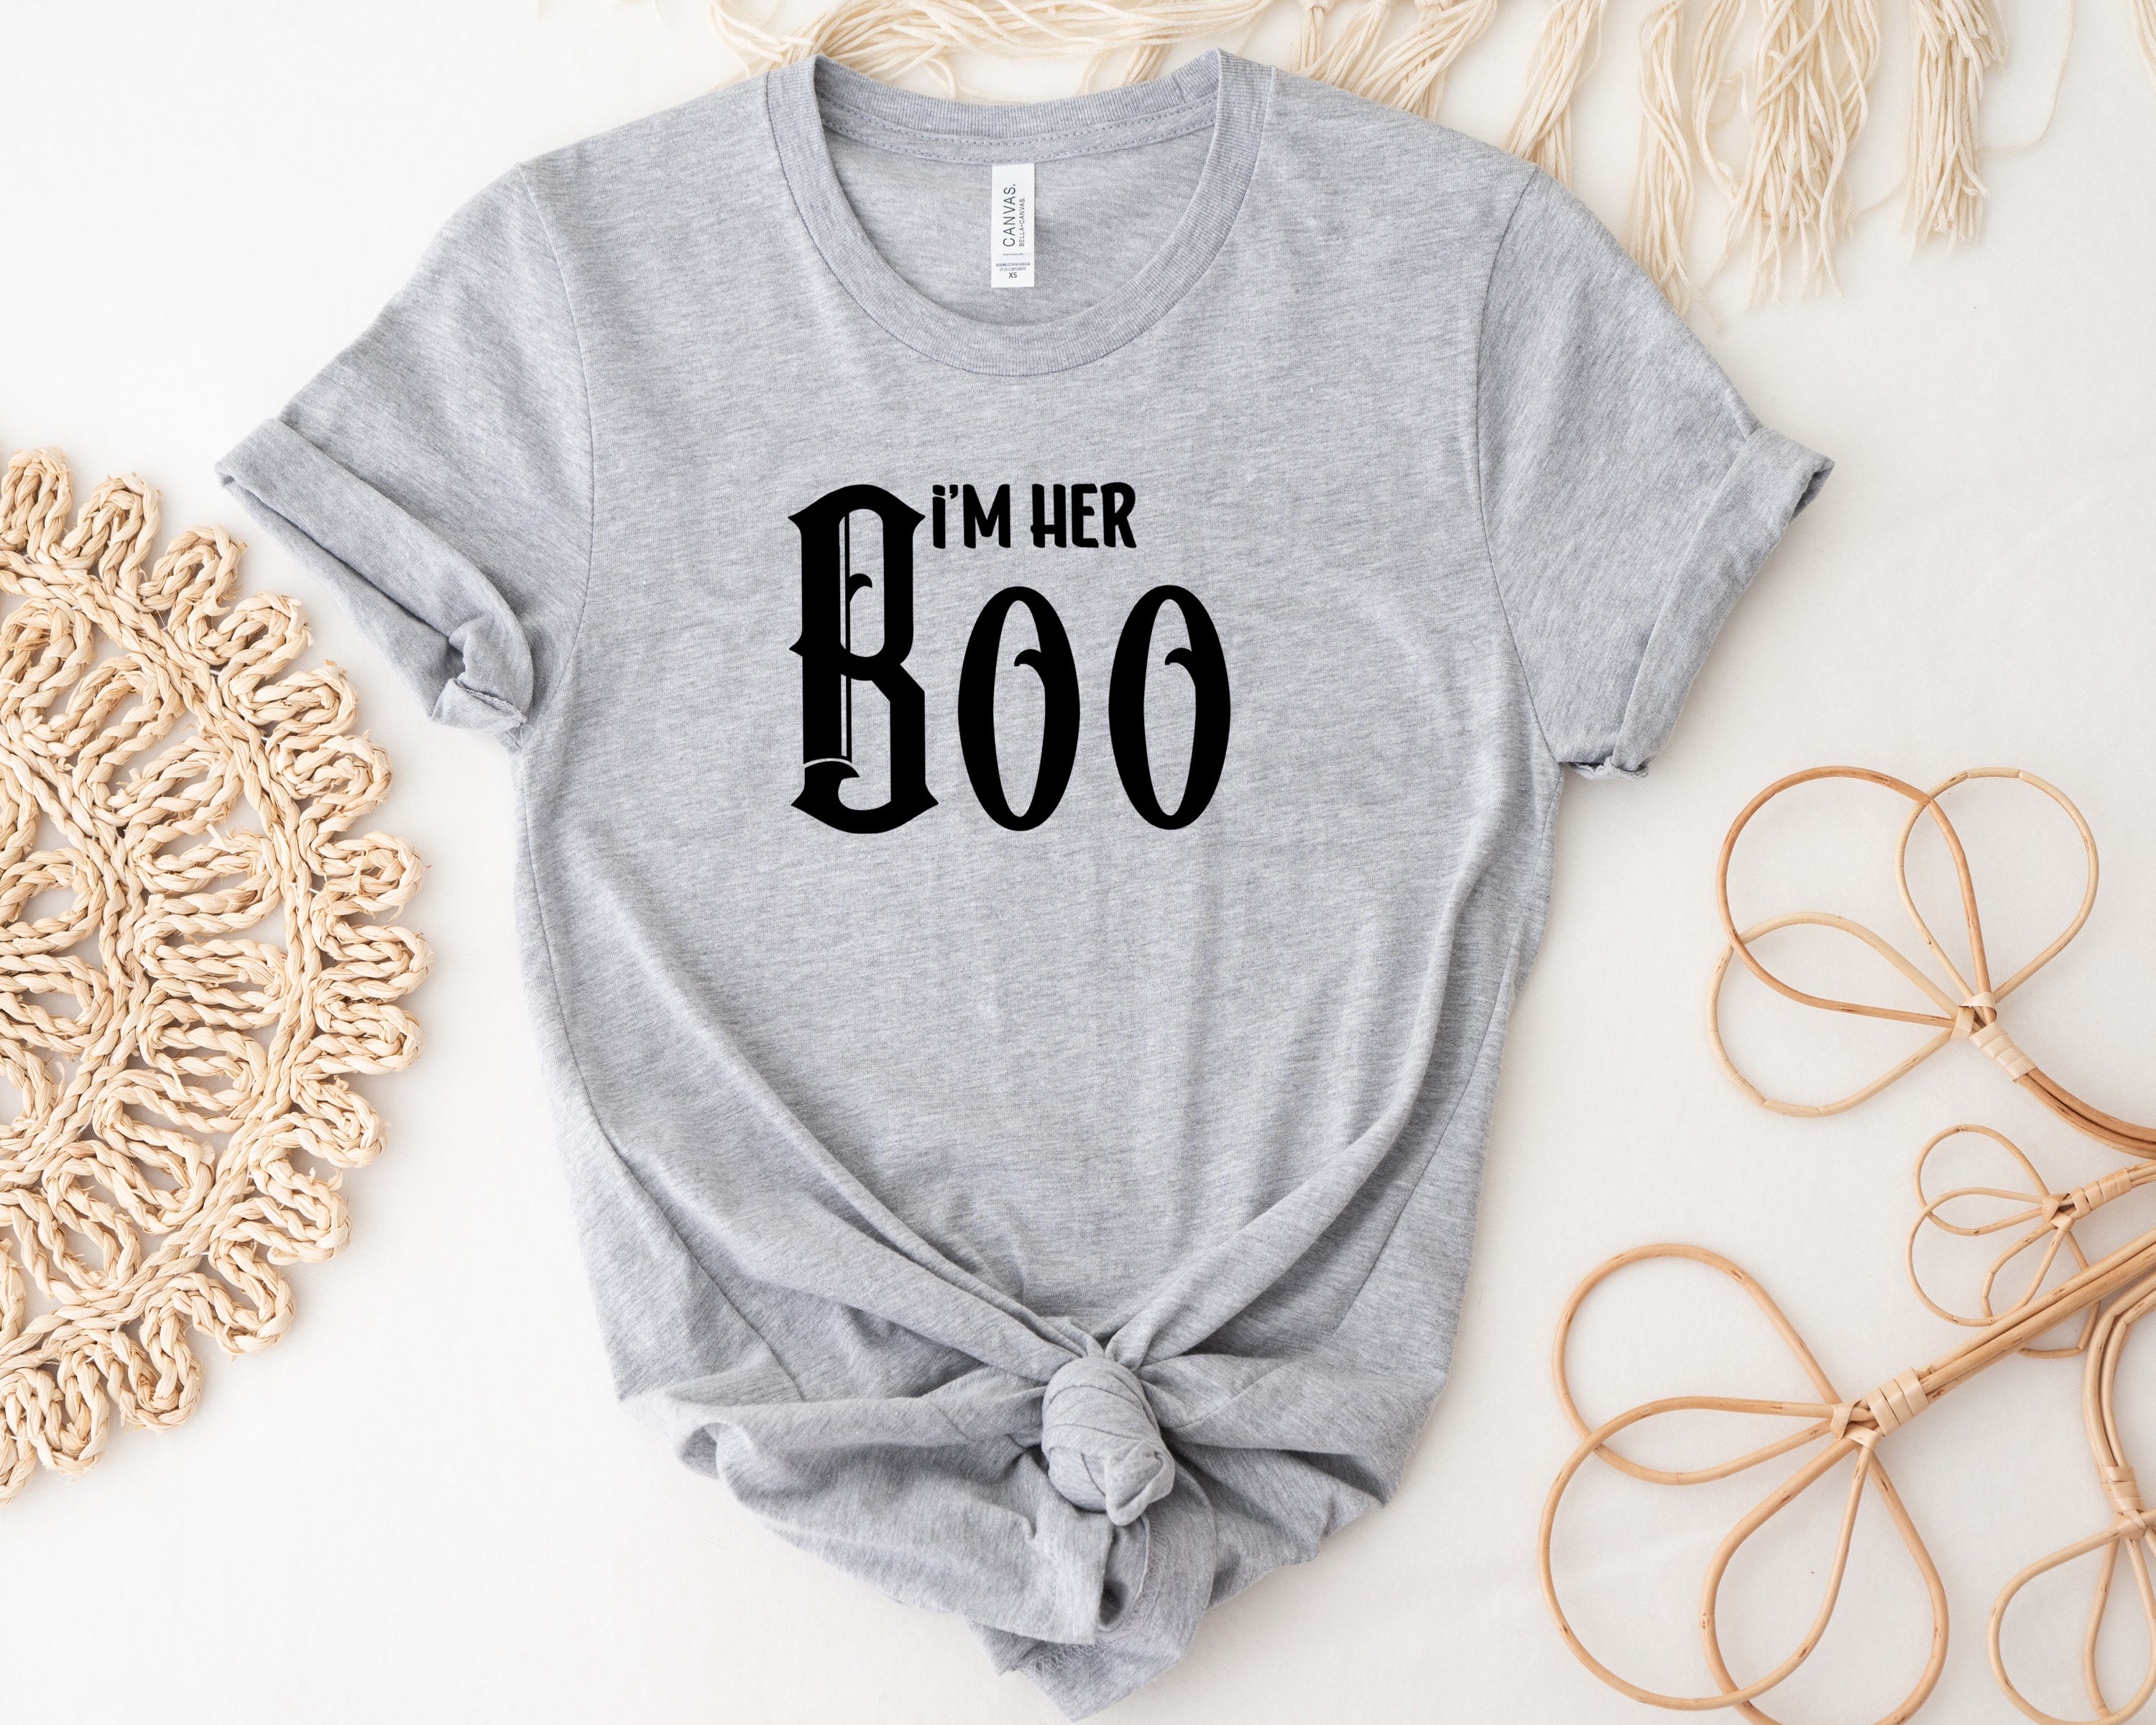 I'm His Ghoul I'm Her Boo| Matching Couple Halloween Shirts